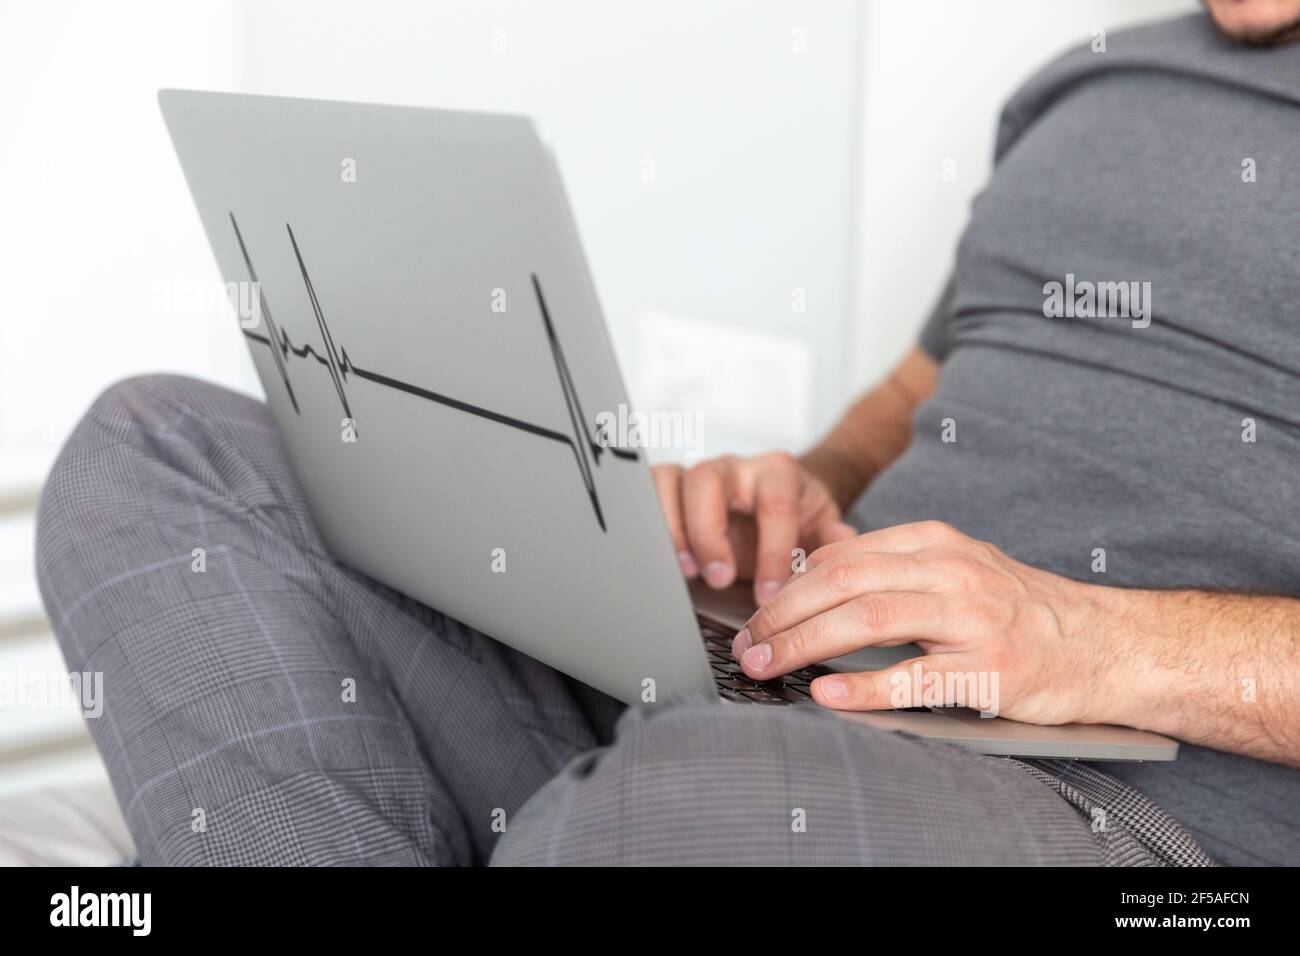 A man works on a computer in bed close up hands Stock Photo